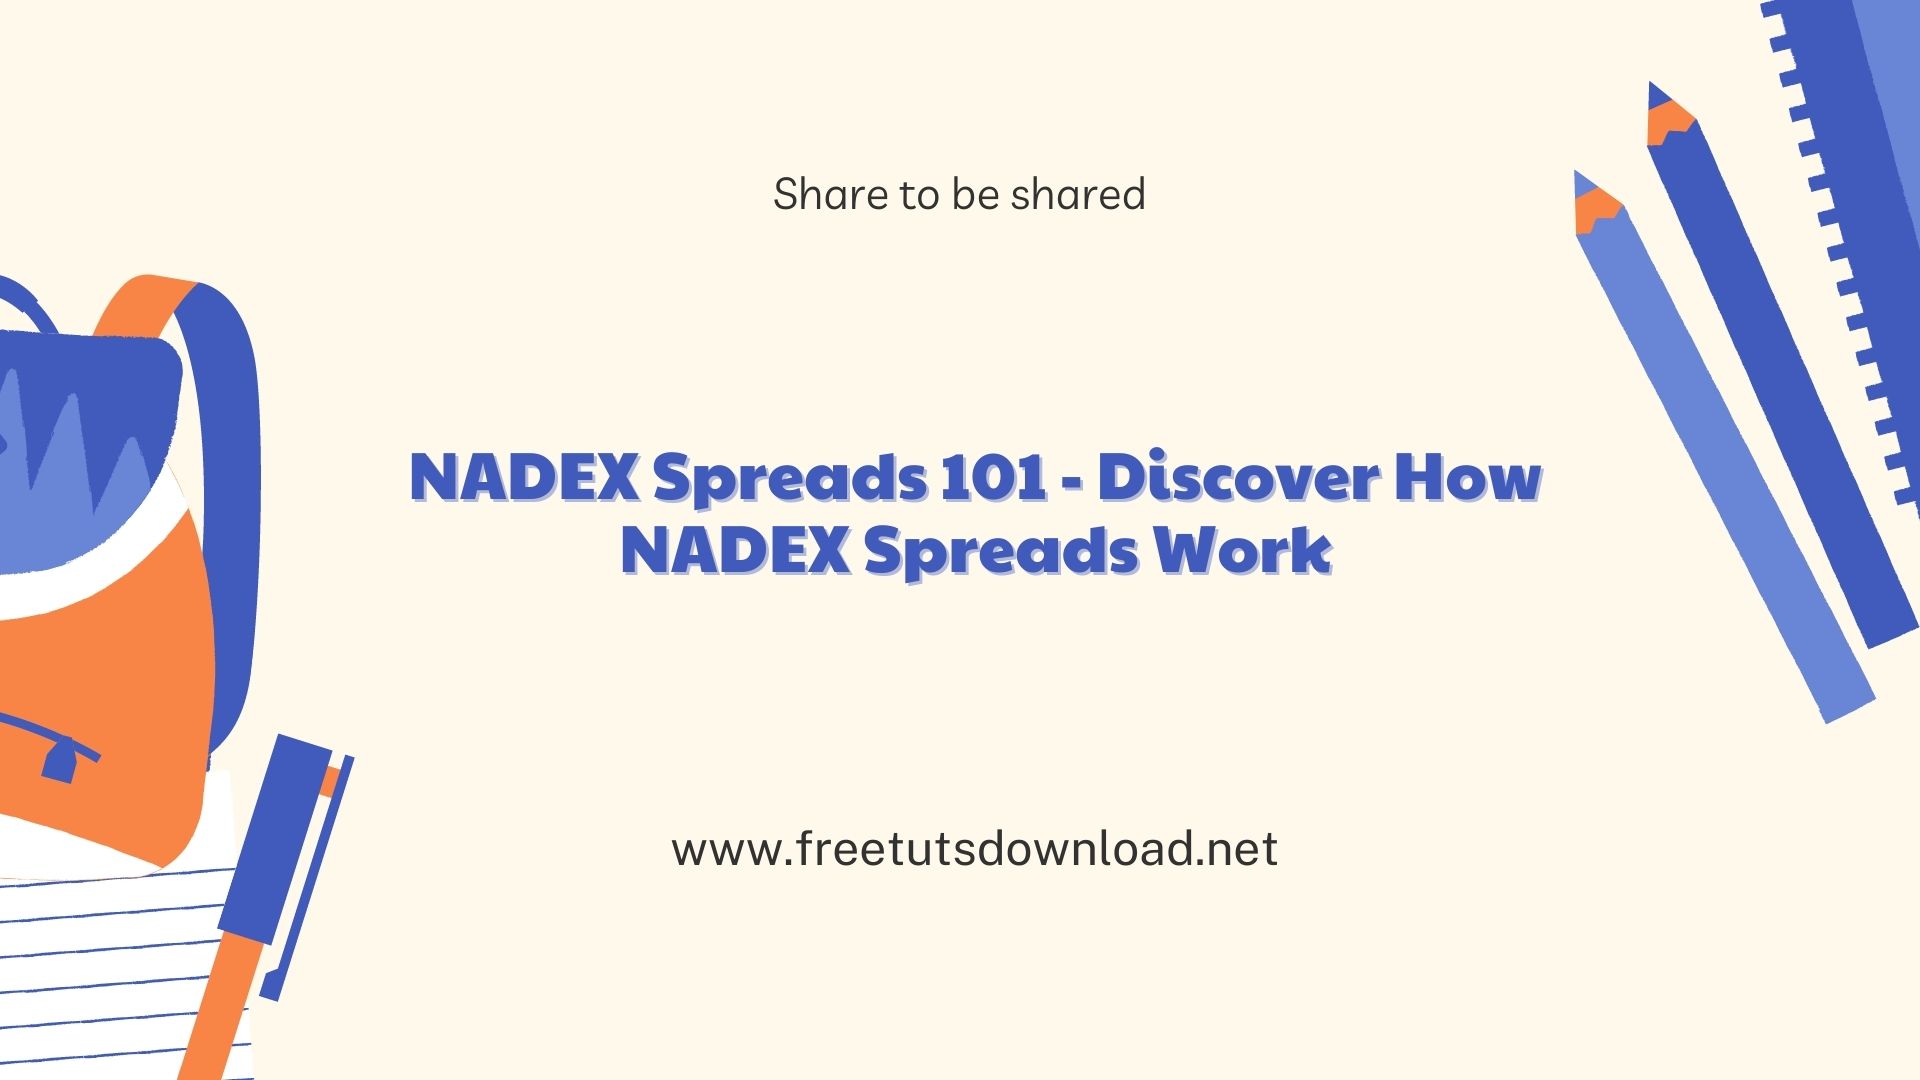 NADEX Spreads 101 - Discover How NADEX Spreads Work